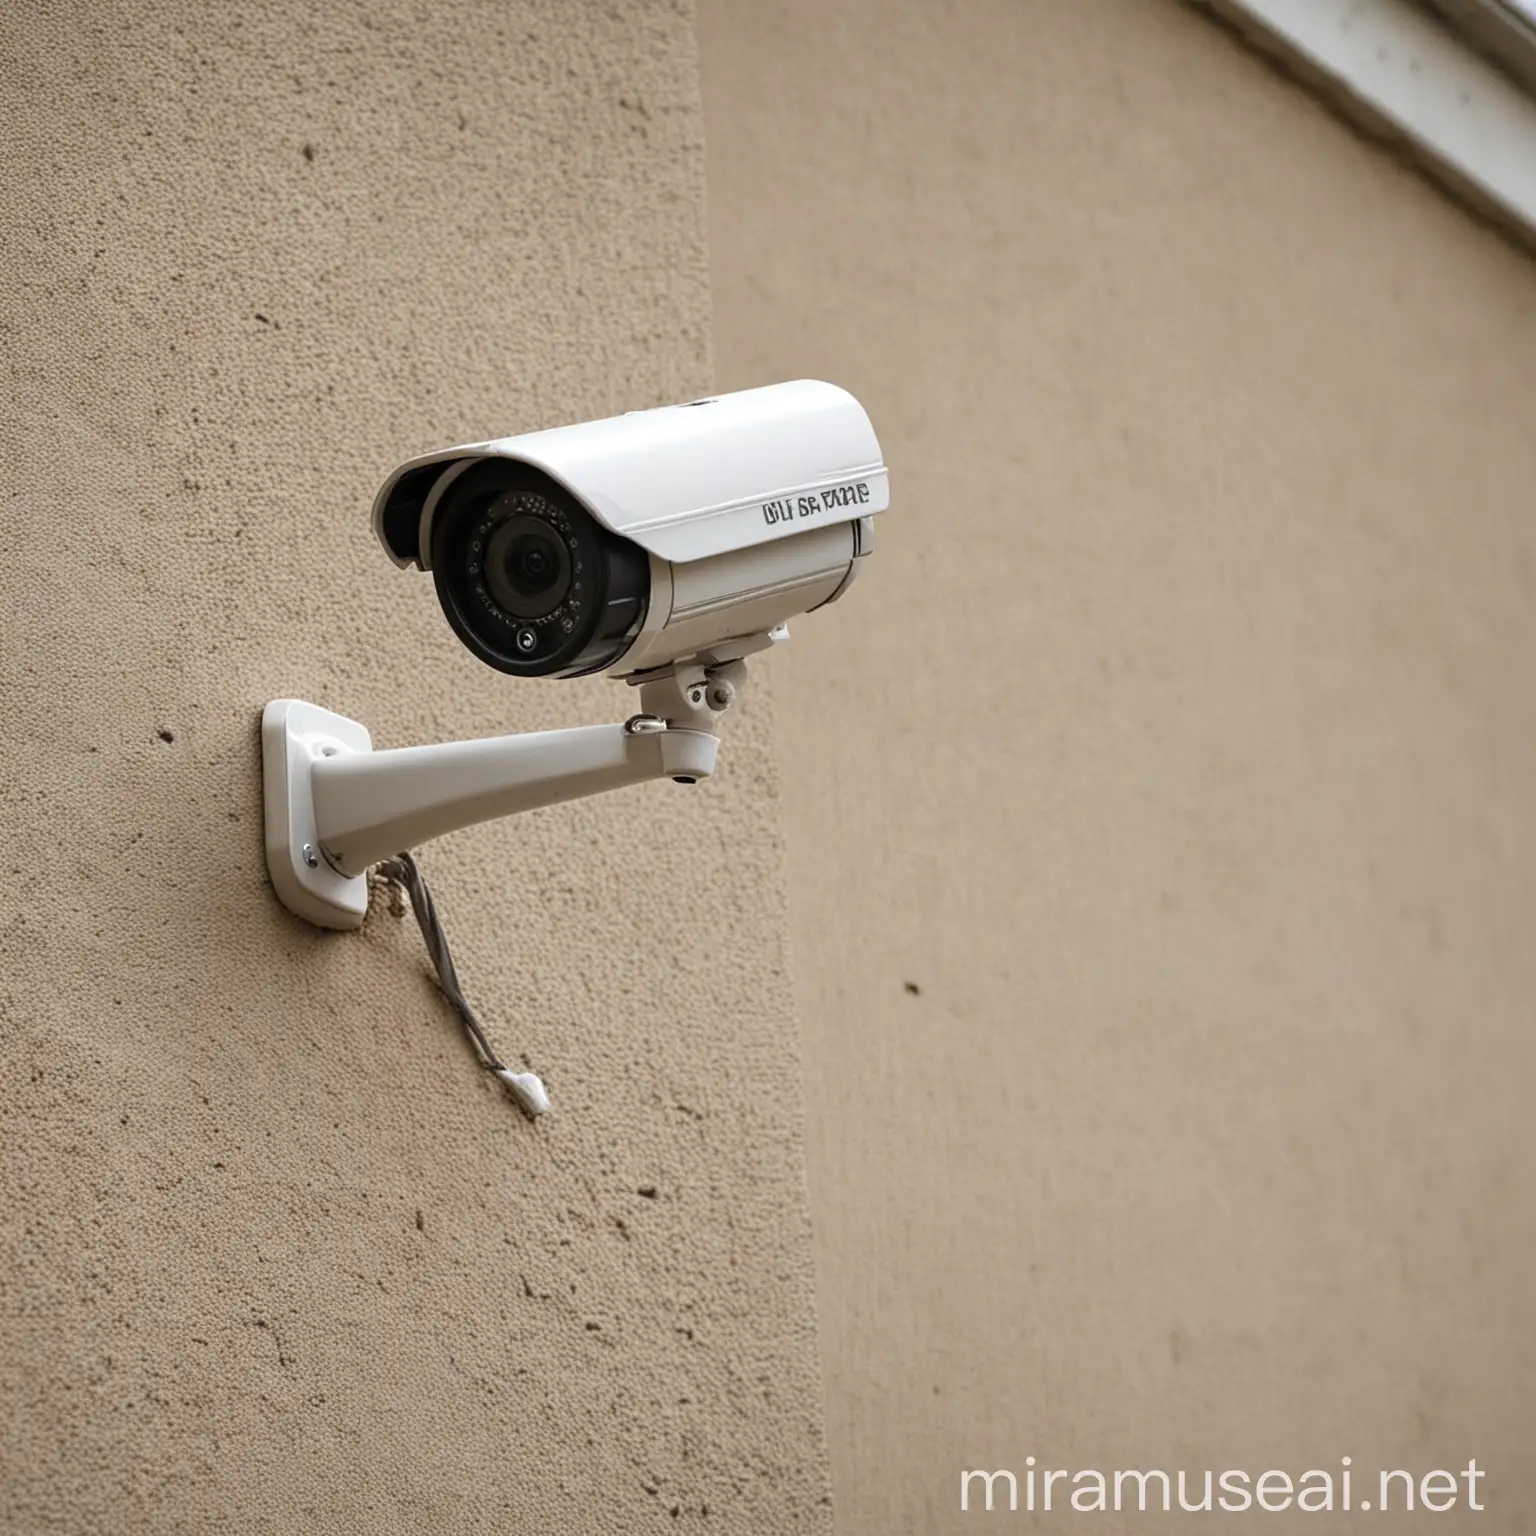 Security Camera Surveillance System in Urban Setting